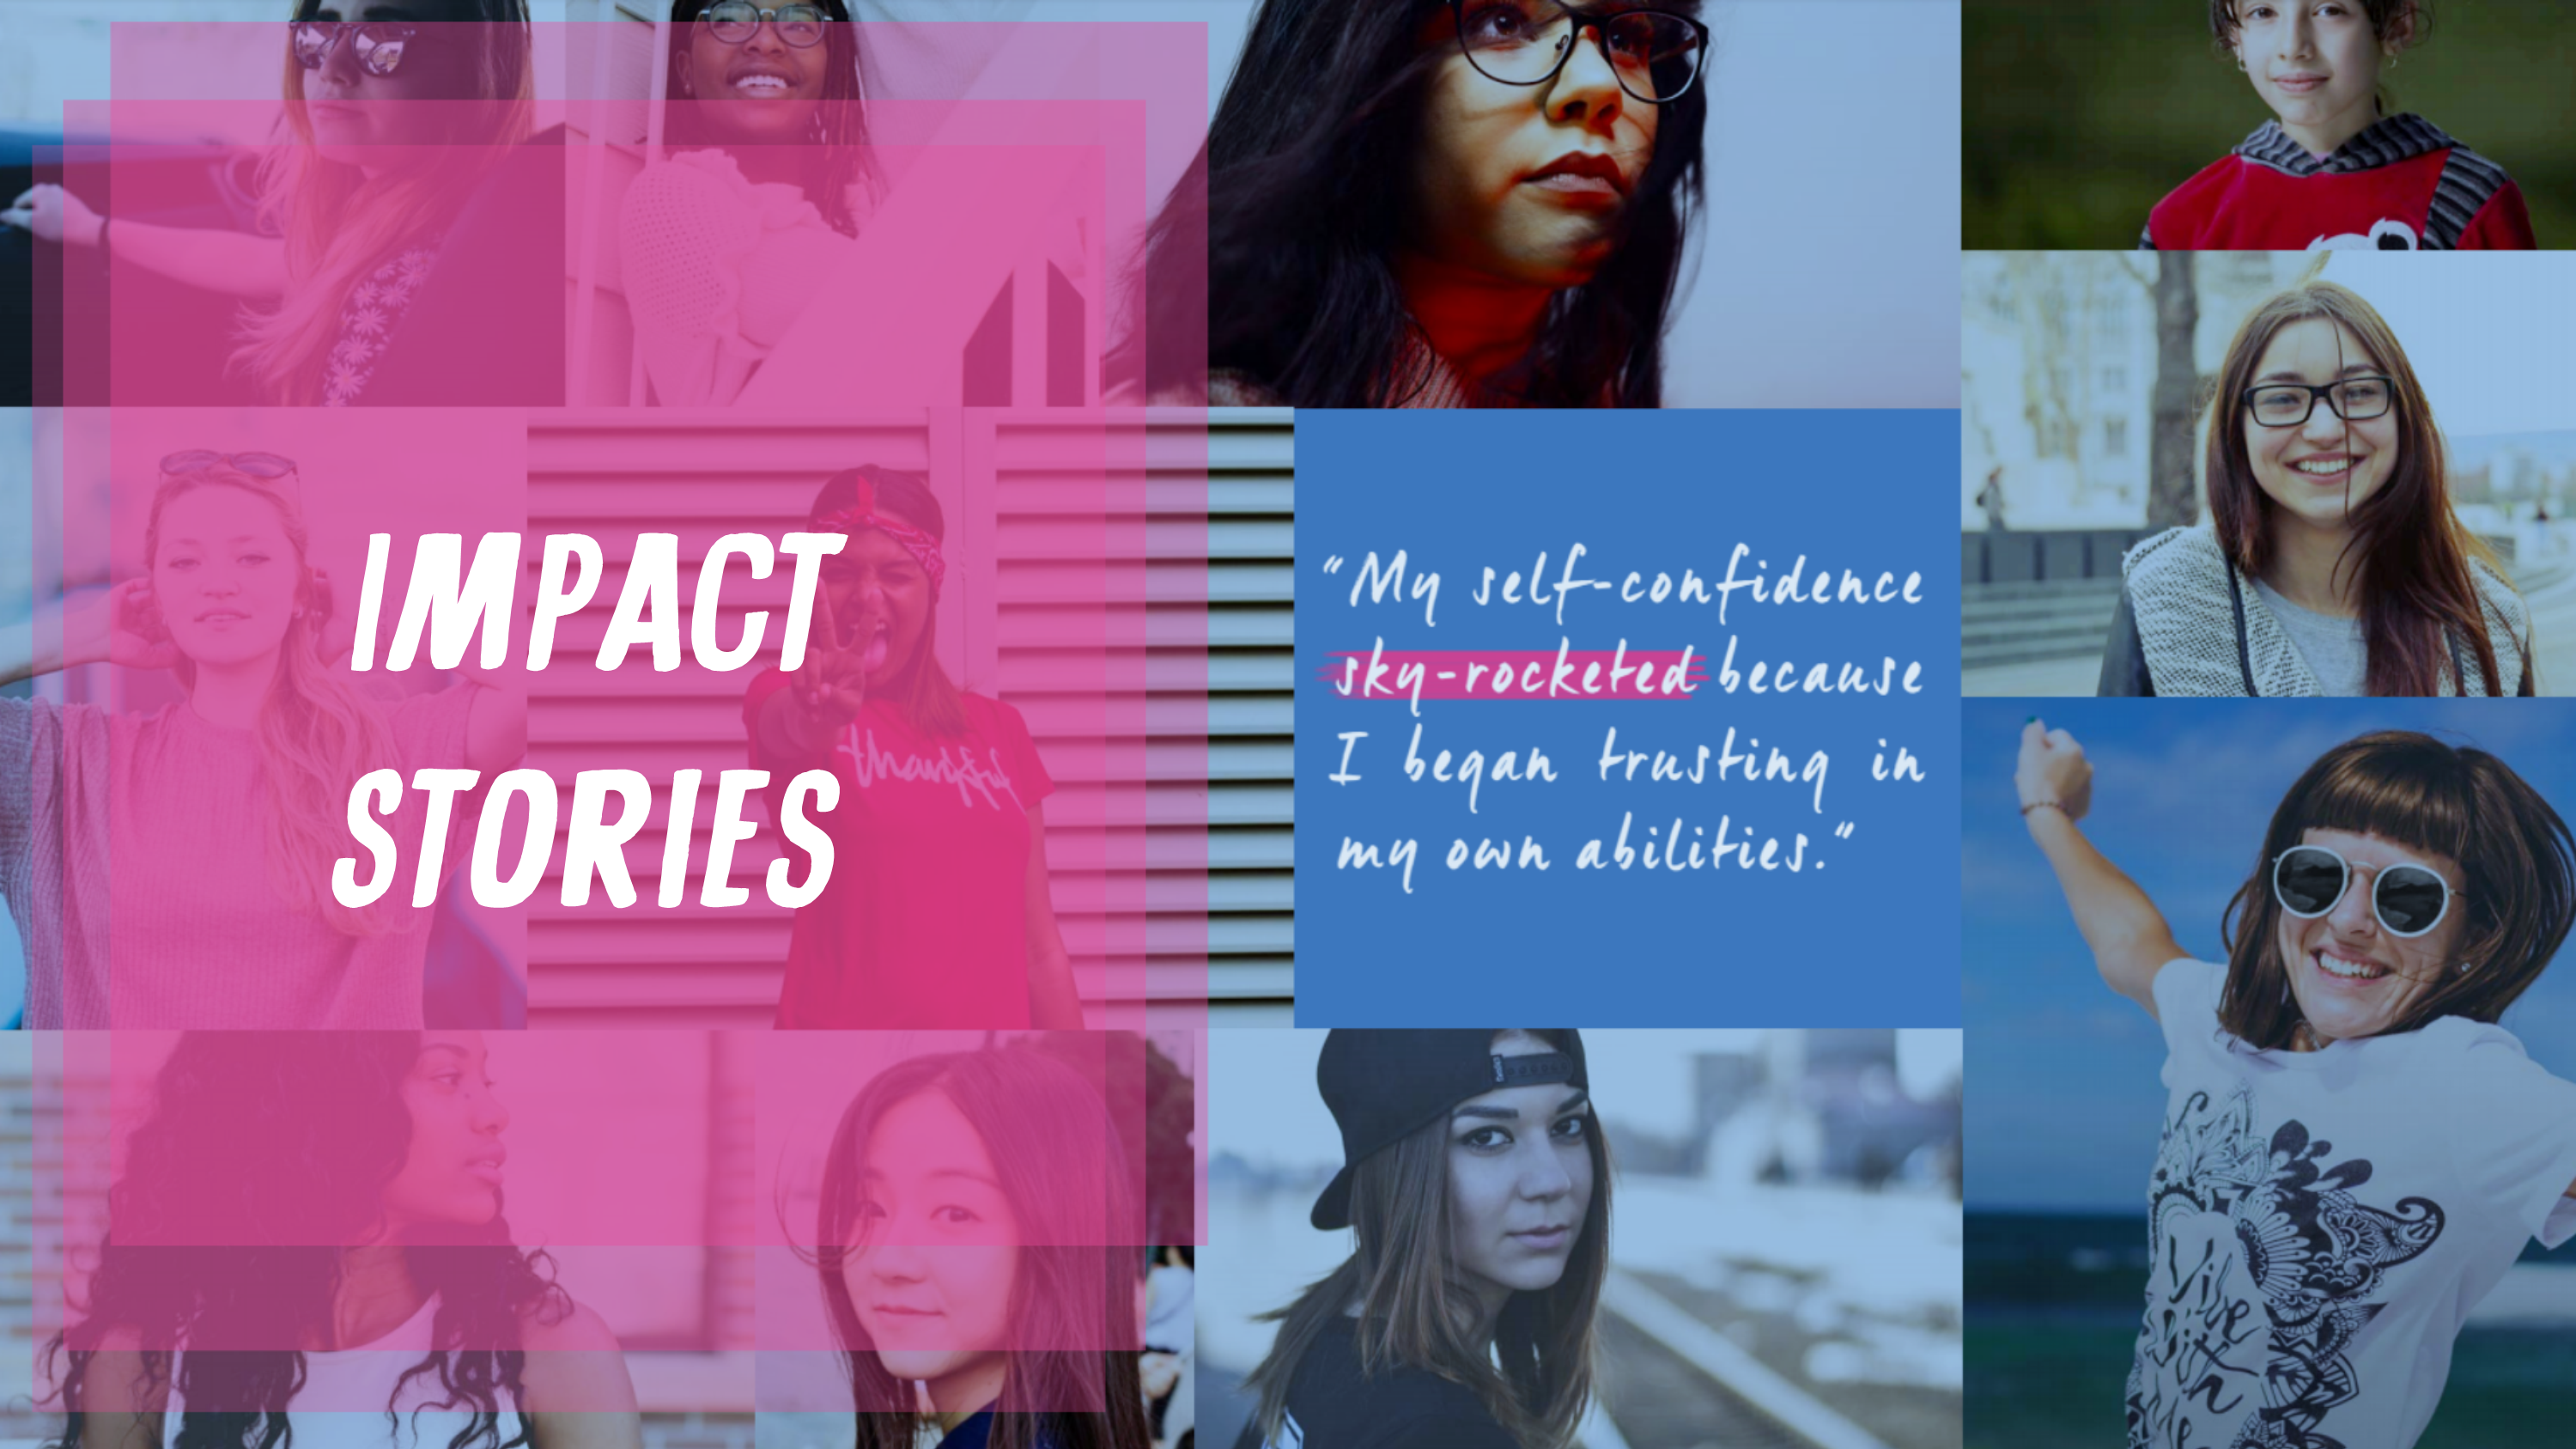 Image: Collage of girls. Text: "Impact Stories: My self-confidence sky-rocketed because I began trusting my own abilities."